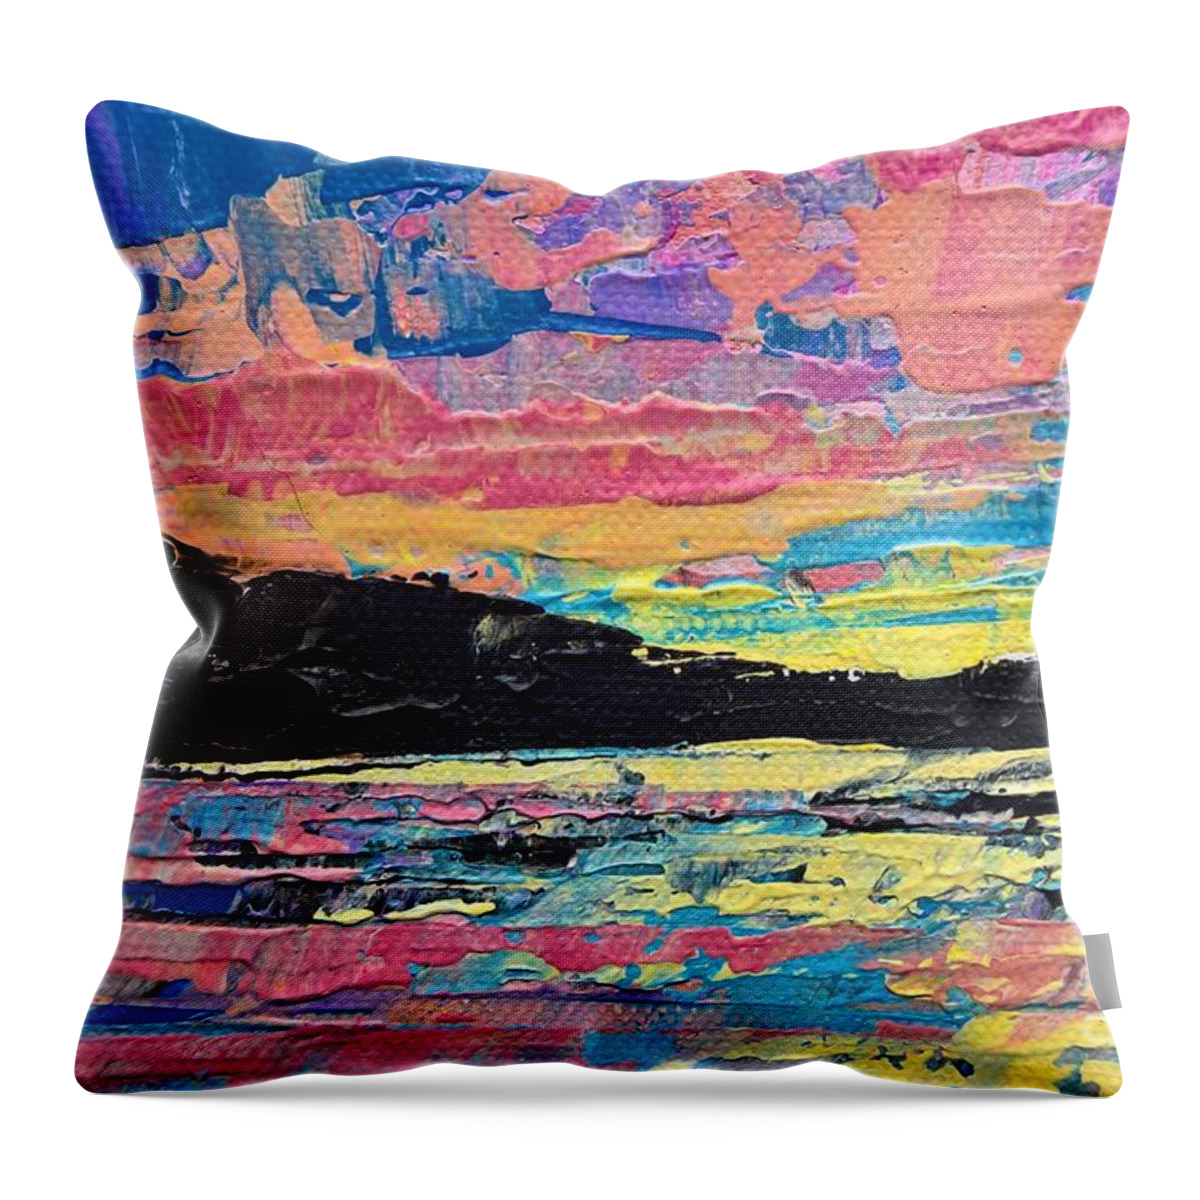 Original Acrylic Painting Throw Pillow featuring the painting Color Burst by Lisa Dionne